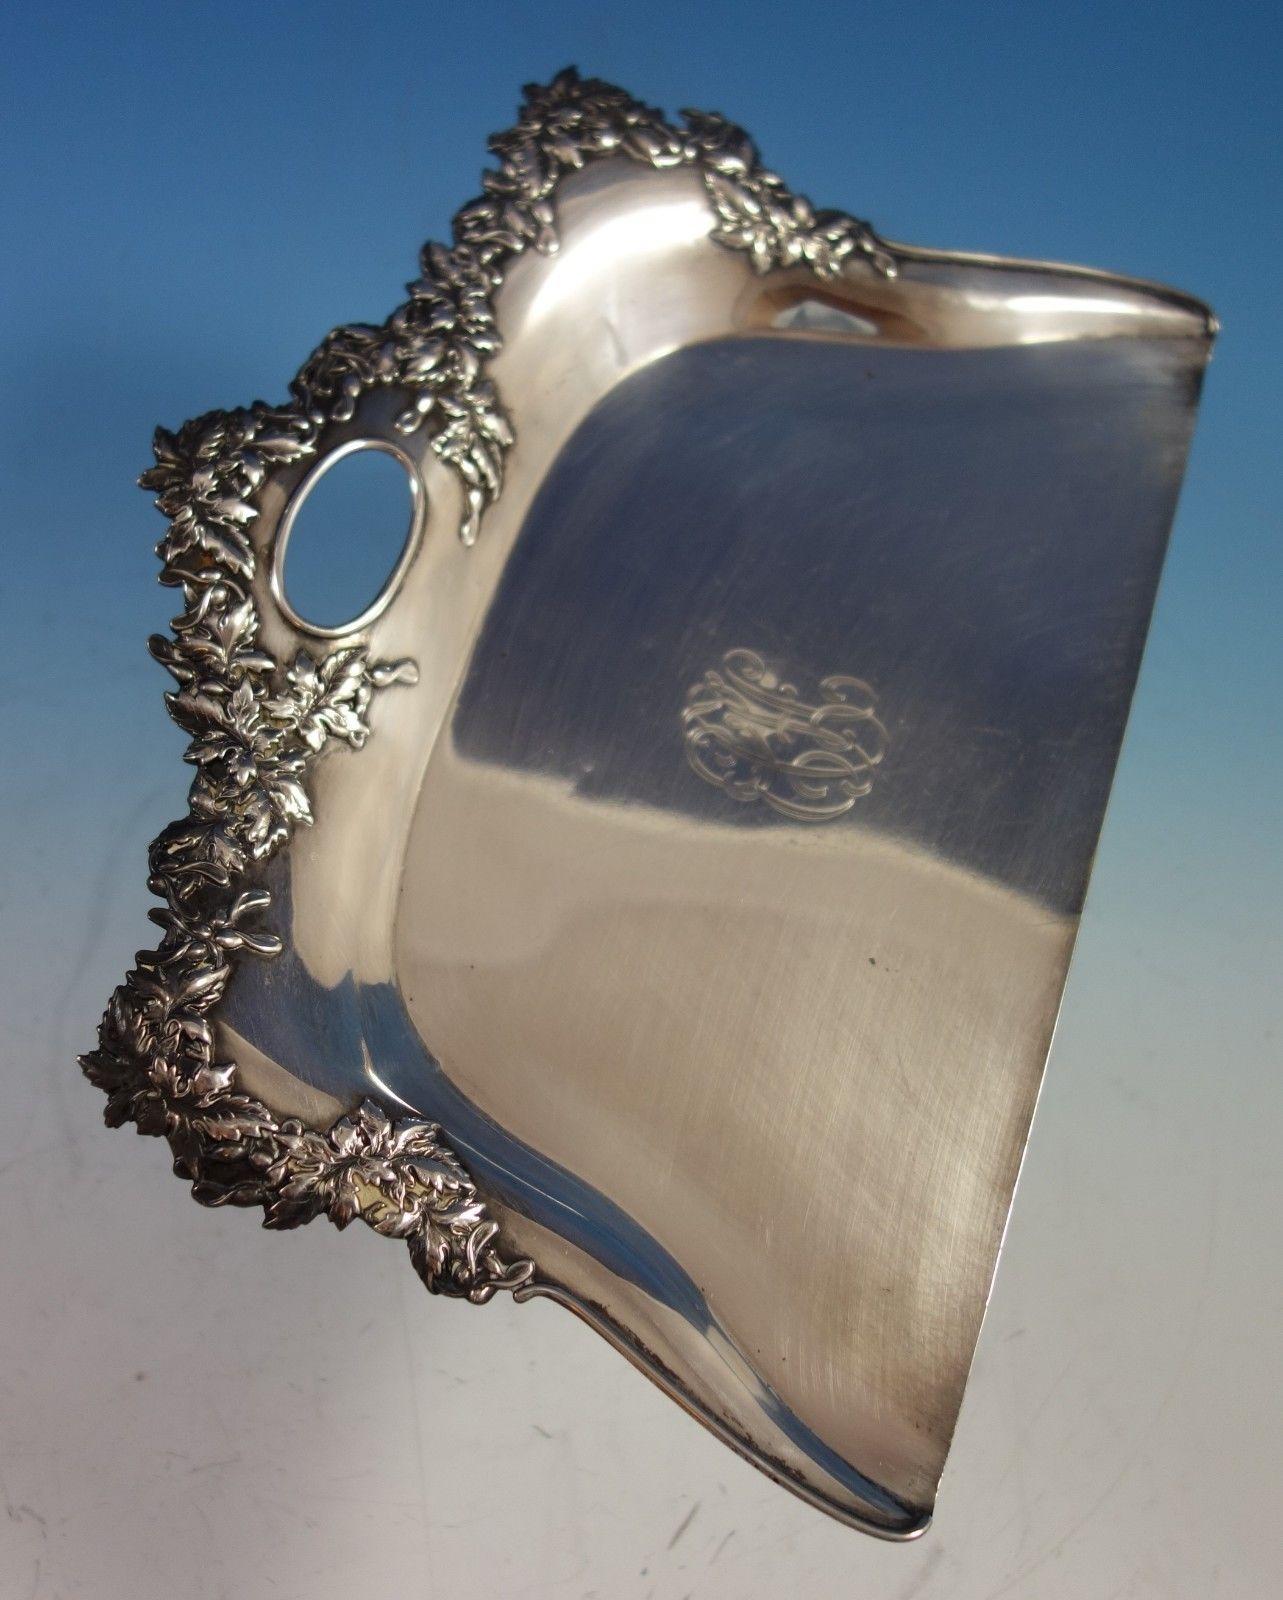 Shreve sterling silver crumb tray featuring maple leaves and maple seed pods. The piece has a vintage scrolly monogram (see photos). The tray measures 10 1/4 x 7 1/2 . It is in excellent condition. Absolutely beautiful! 

SKU#2095.
